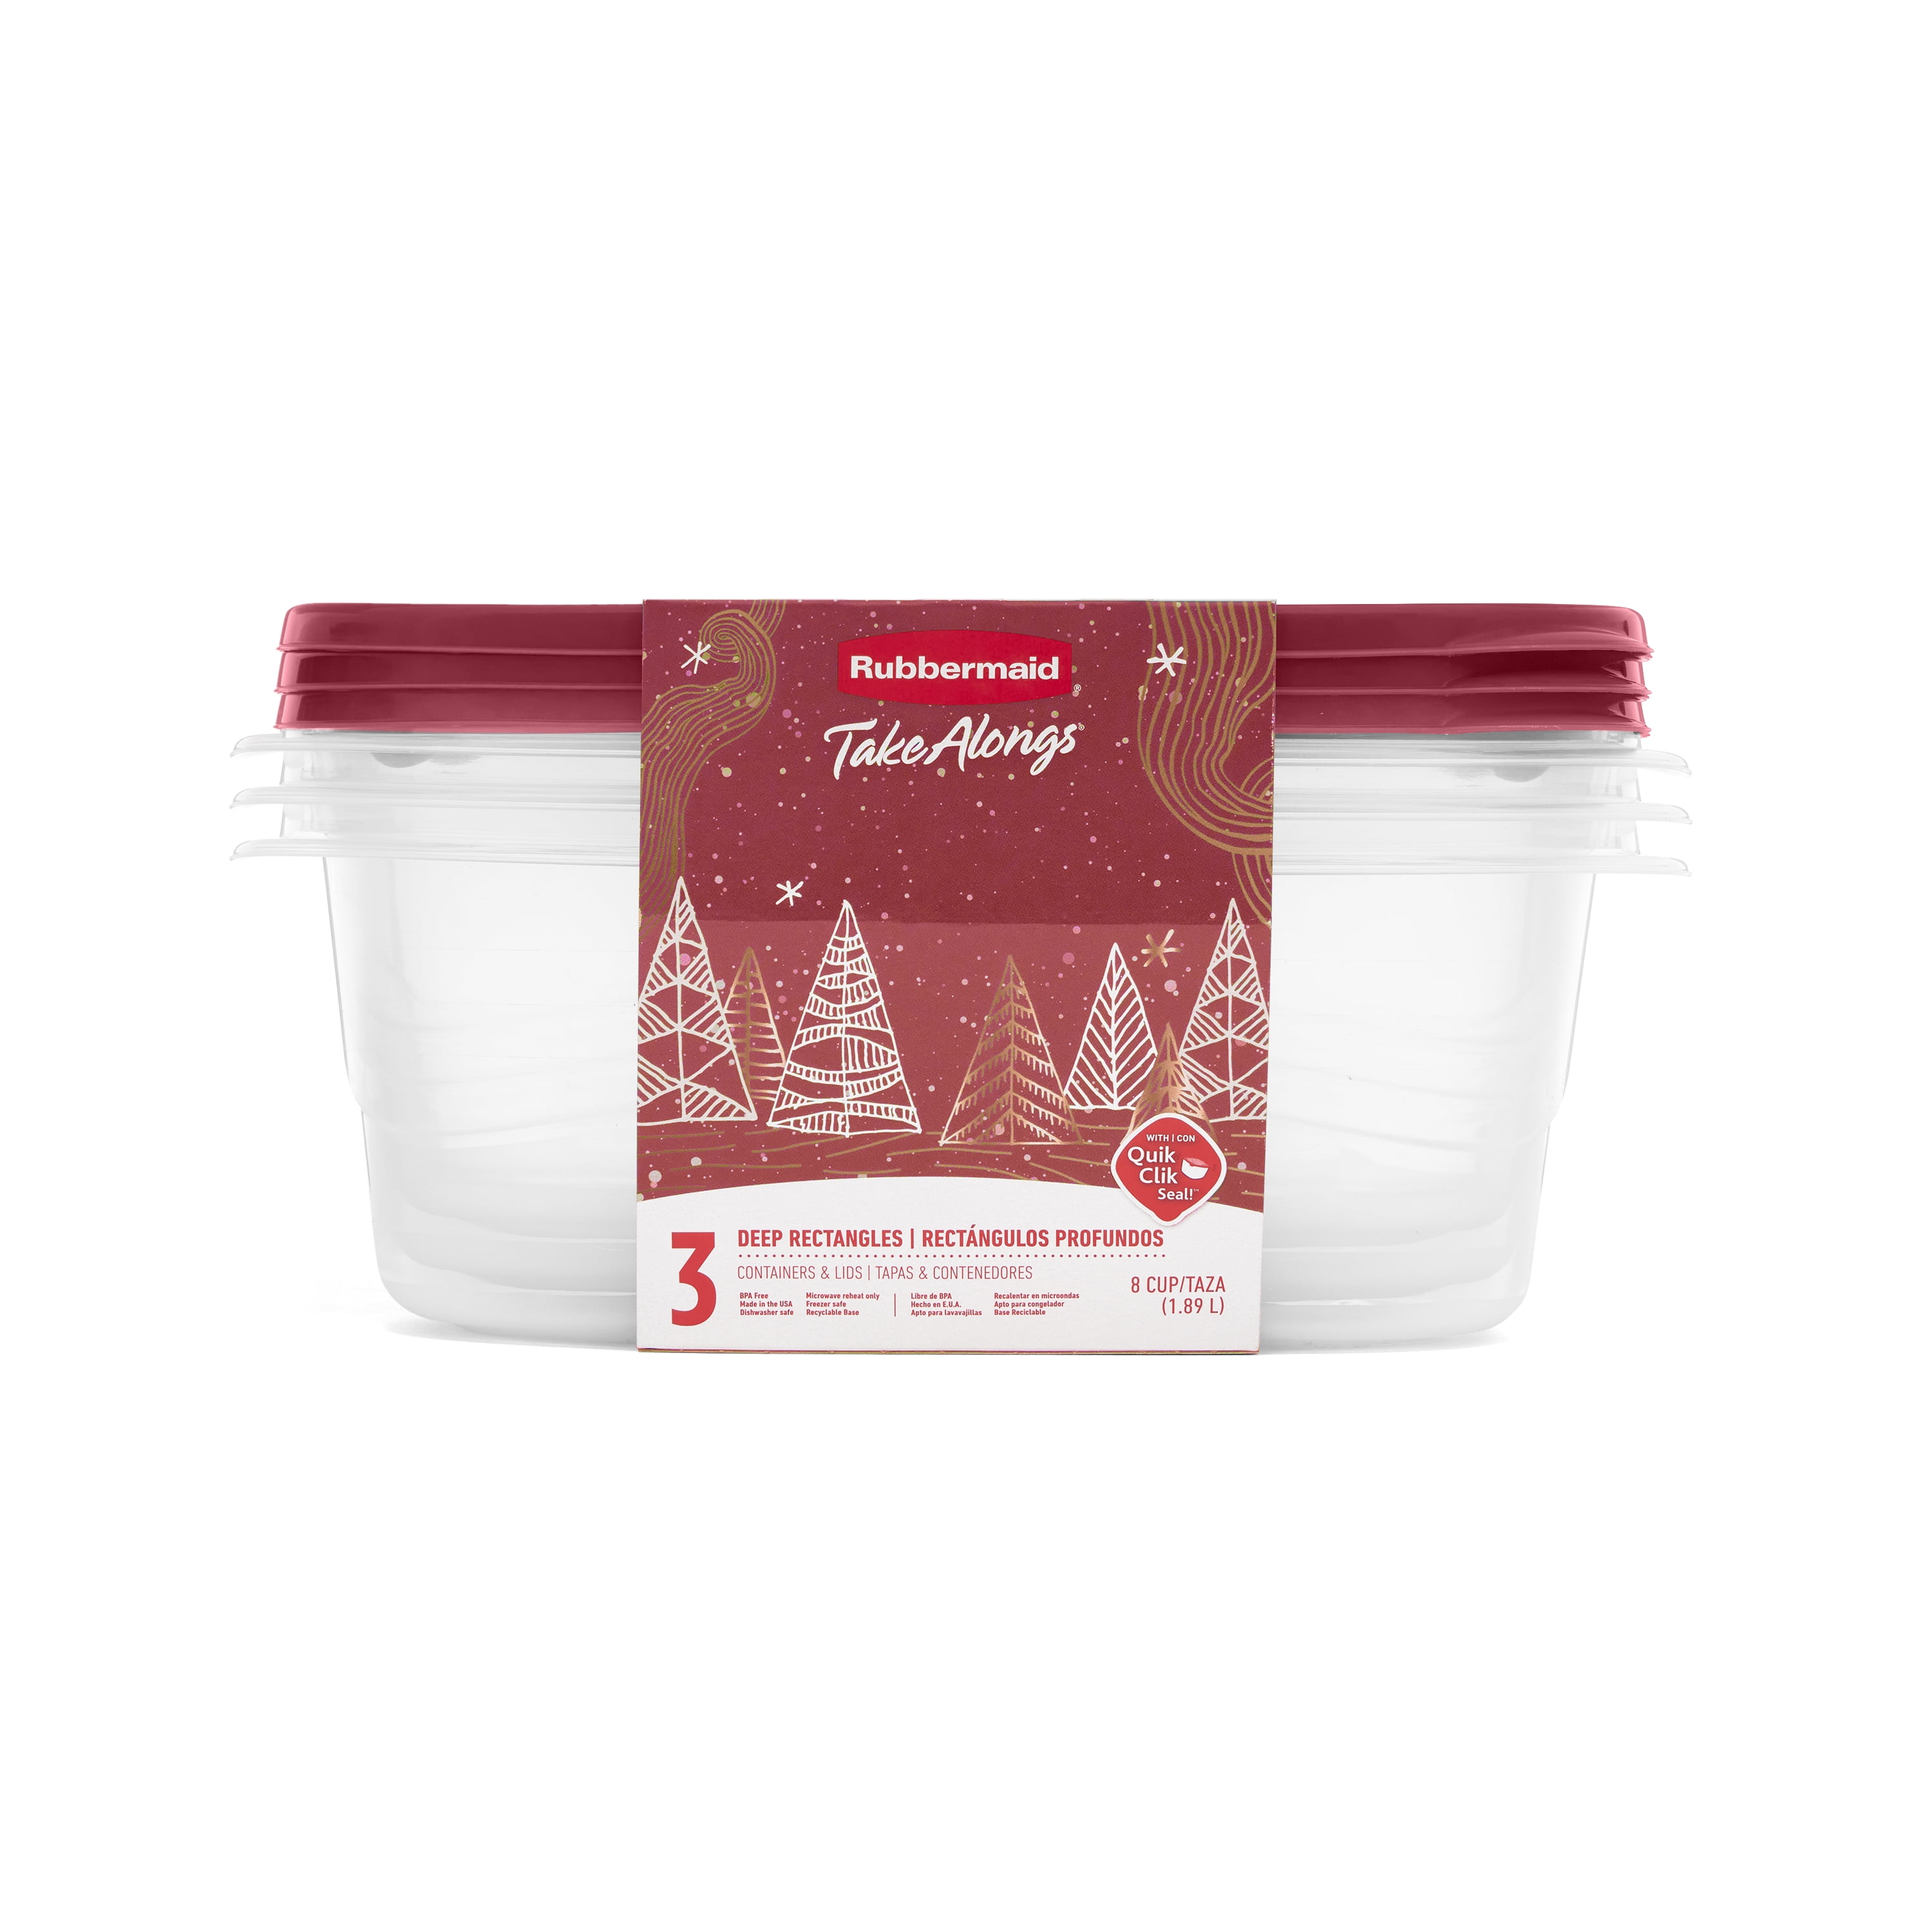 Rubbermaid TakeAlongs 8 Cup Deep Rectangle Food Storage Containers, Set of 3, Rhubarb Red